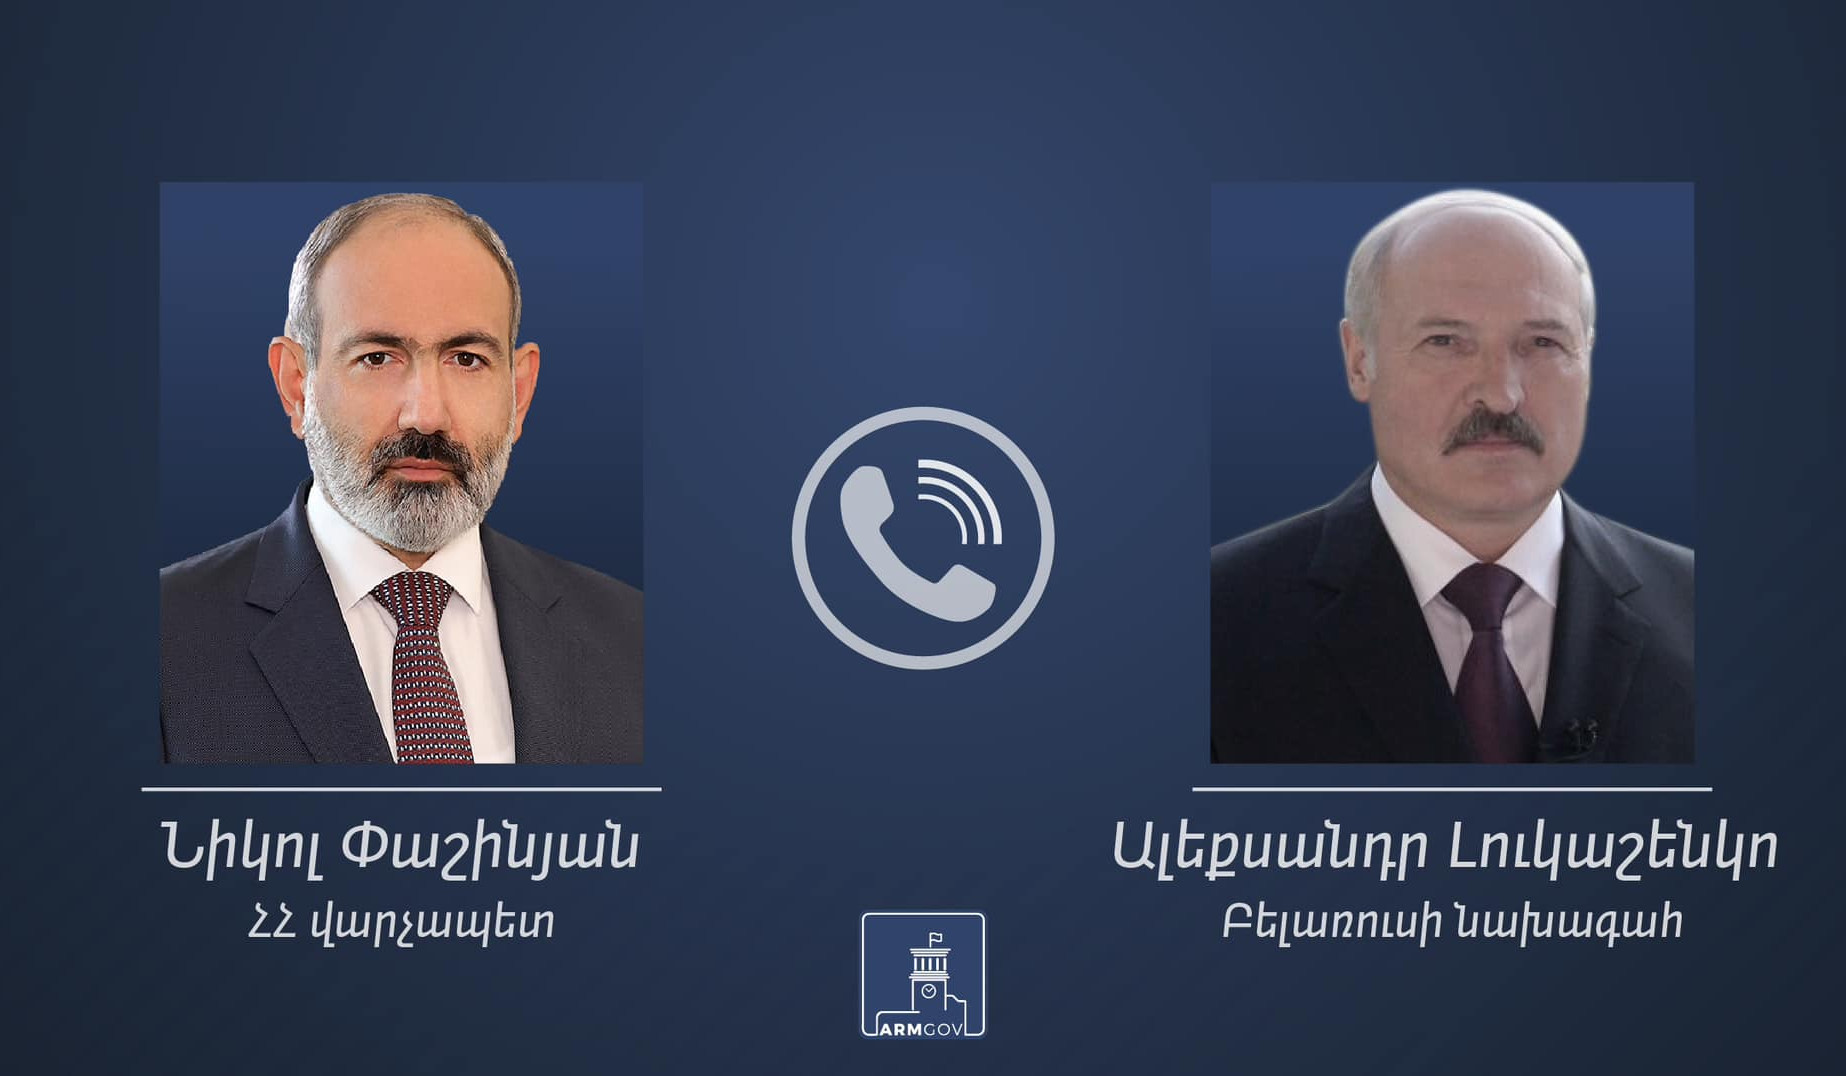 Pashinyan tells Lukashenko he will not be able to participate in CSTO meeting scheduled in Minsk